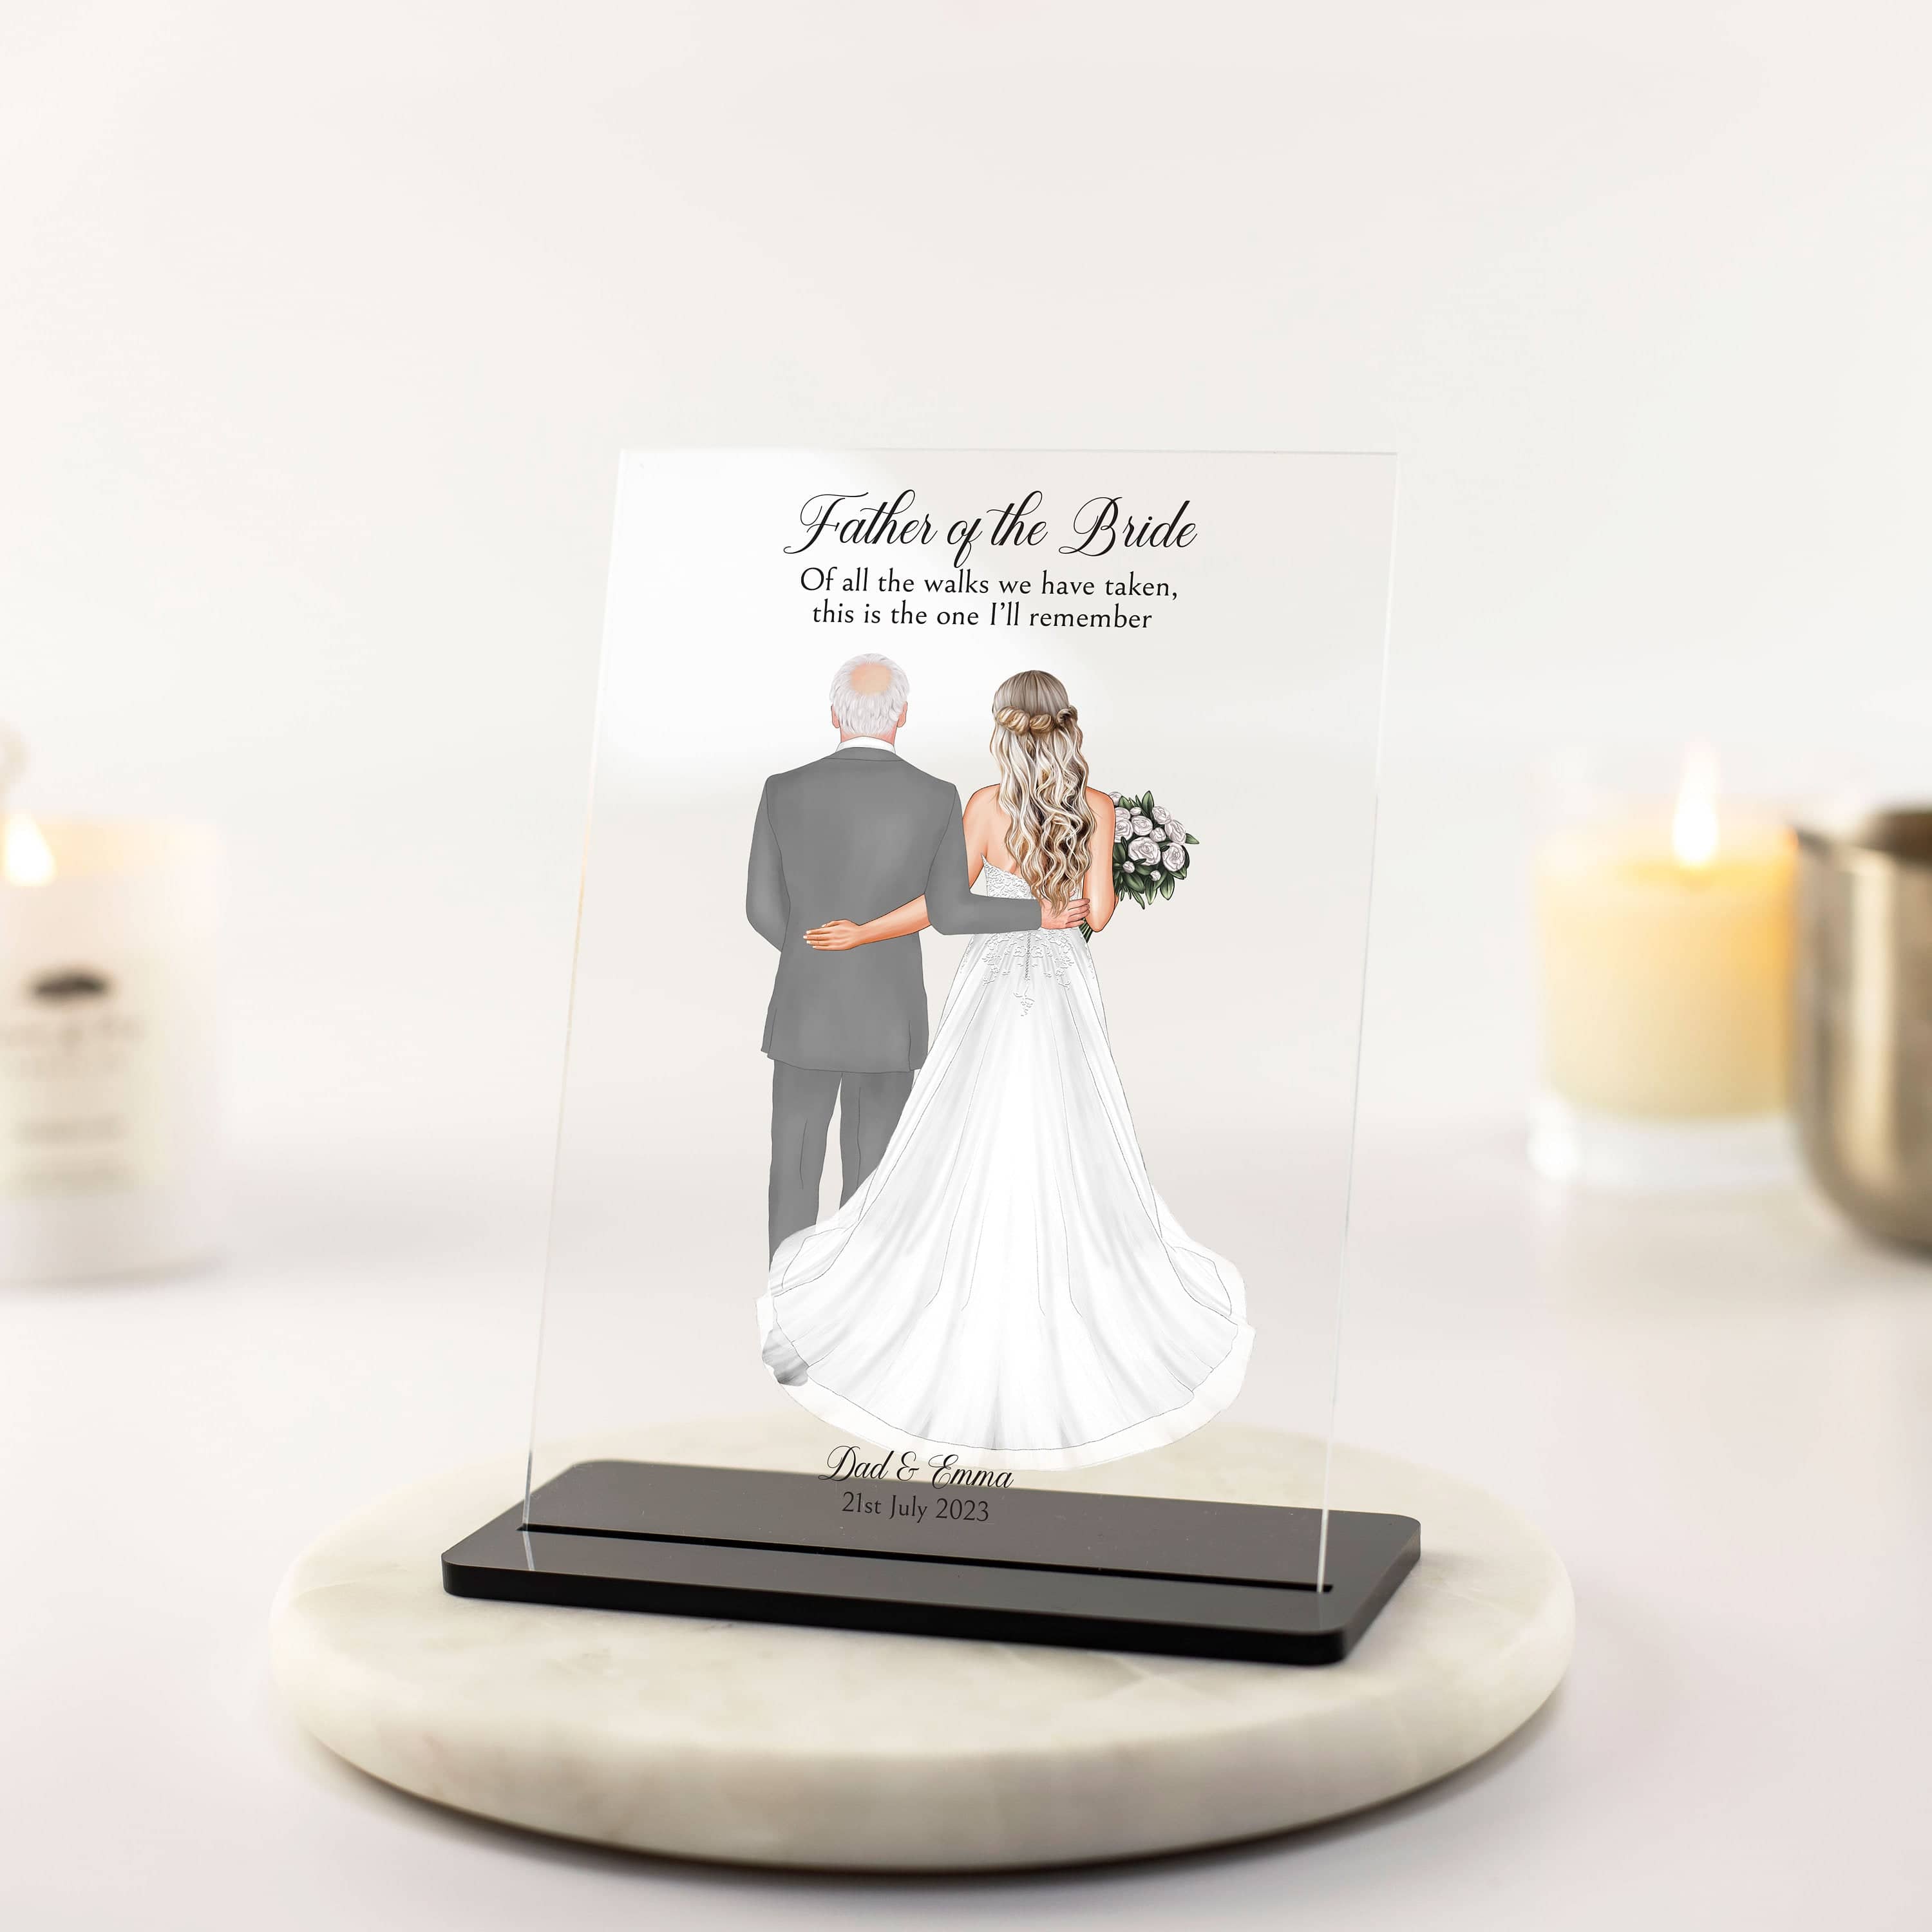 Father of the Bride Gift, Dad of the Bride, Wedding Gift for Dad, Daughter and Dad, Walking down aisle gift, Wedding Gift, Wedding Plaque